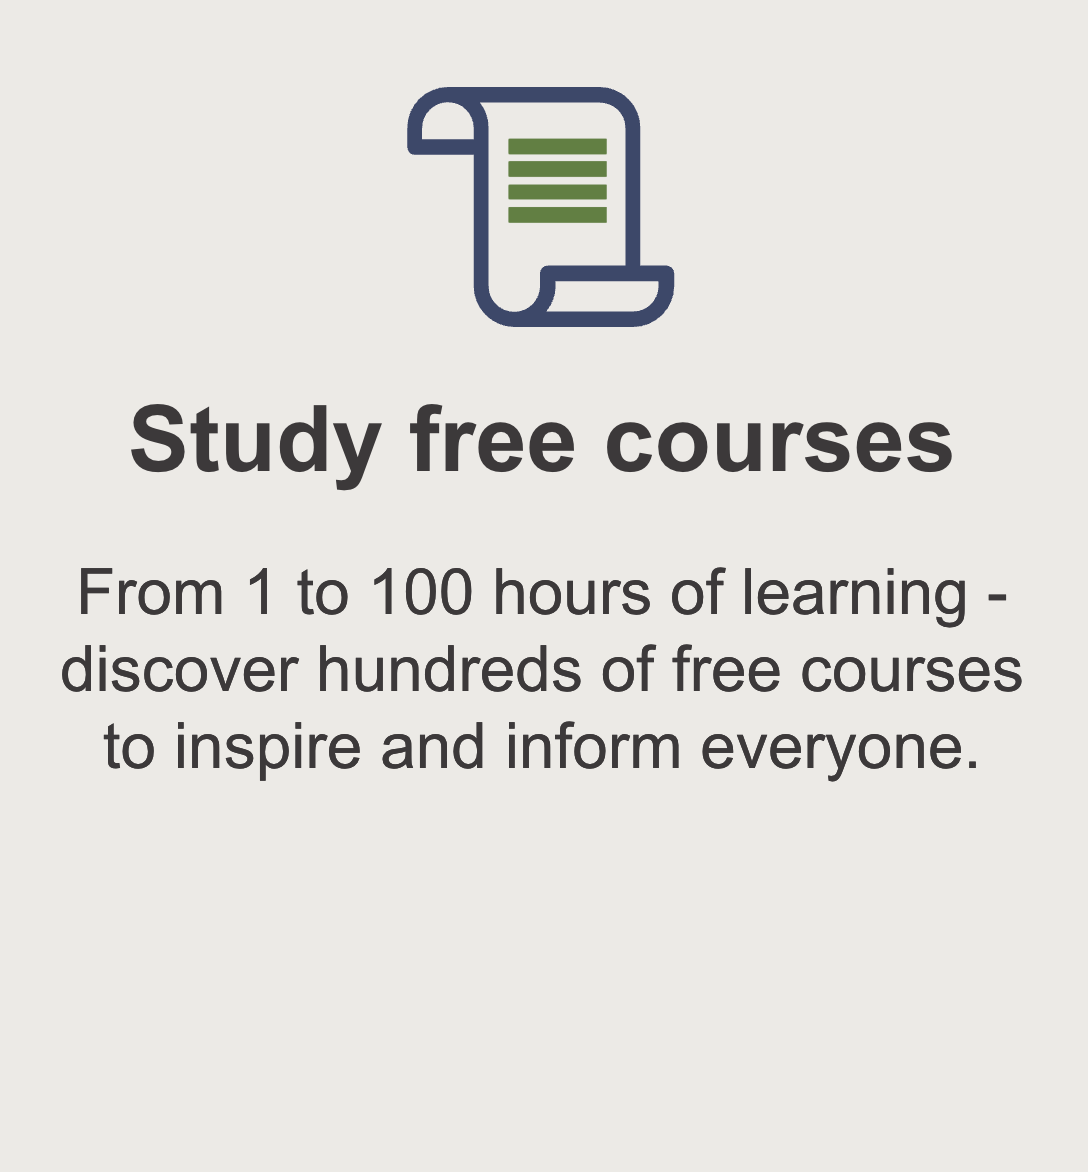 An infographic highlighting the benefits of OpenLearn for studying free courses.